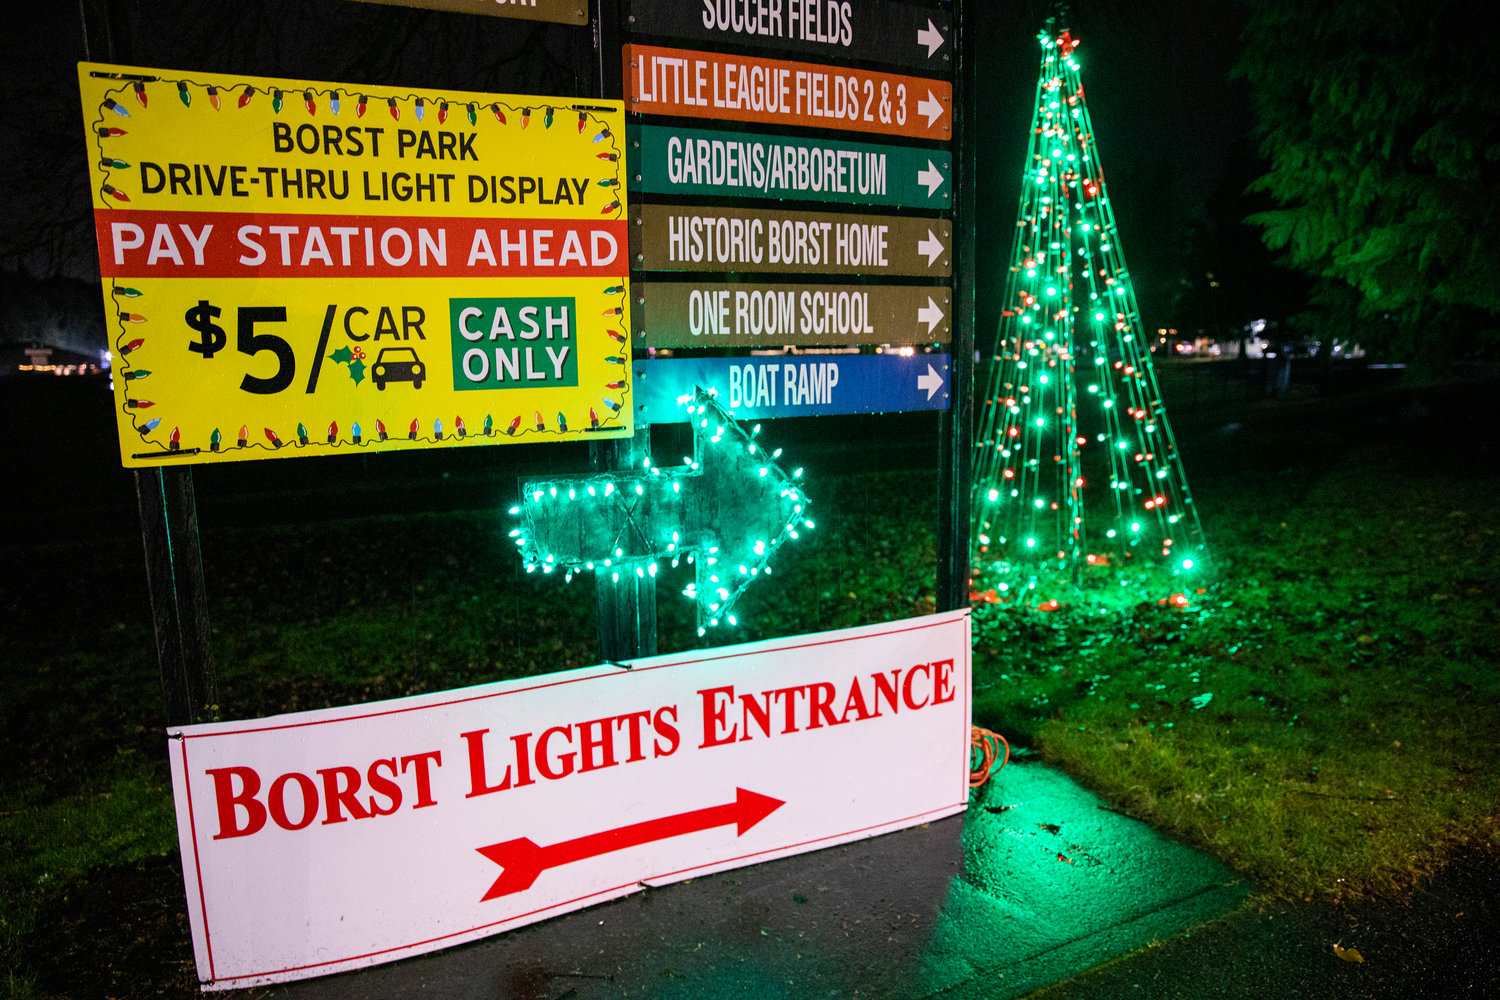 For $5, a car full of people can view the Borst Park Christmas lights display in Centralia.